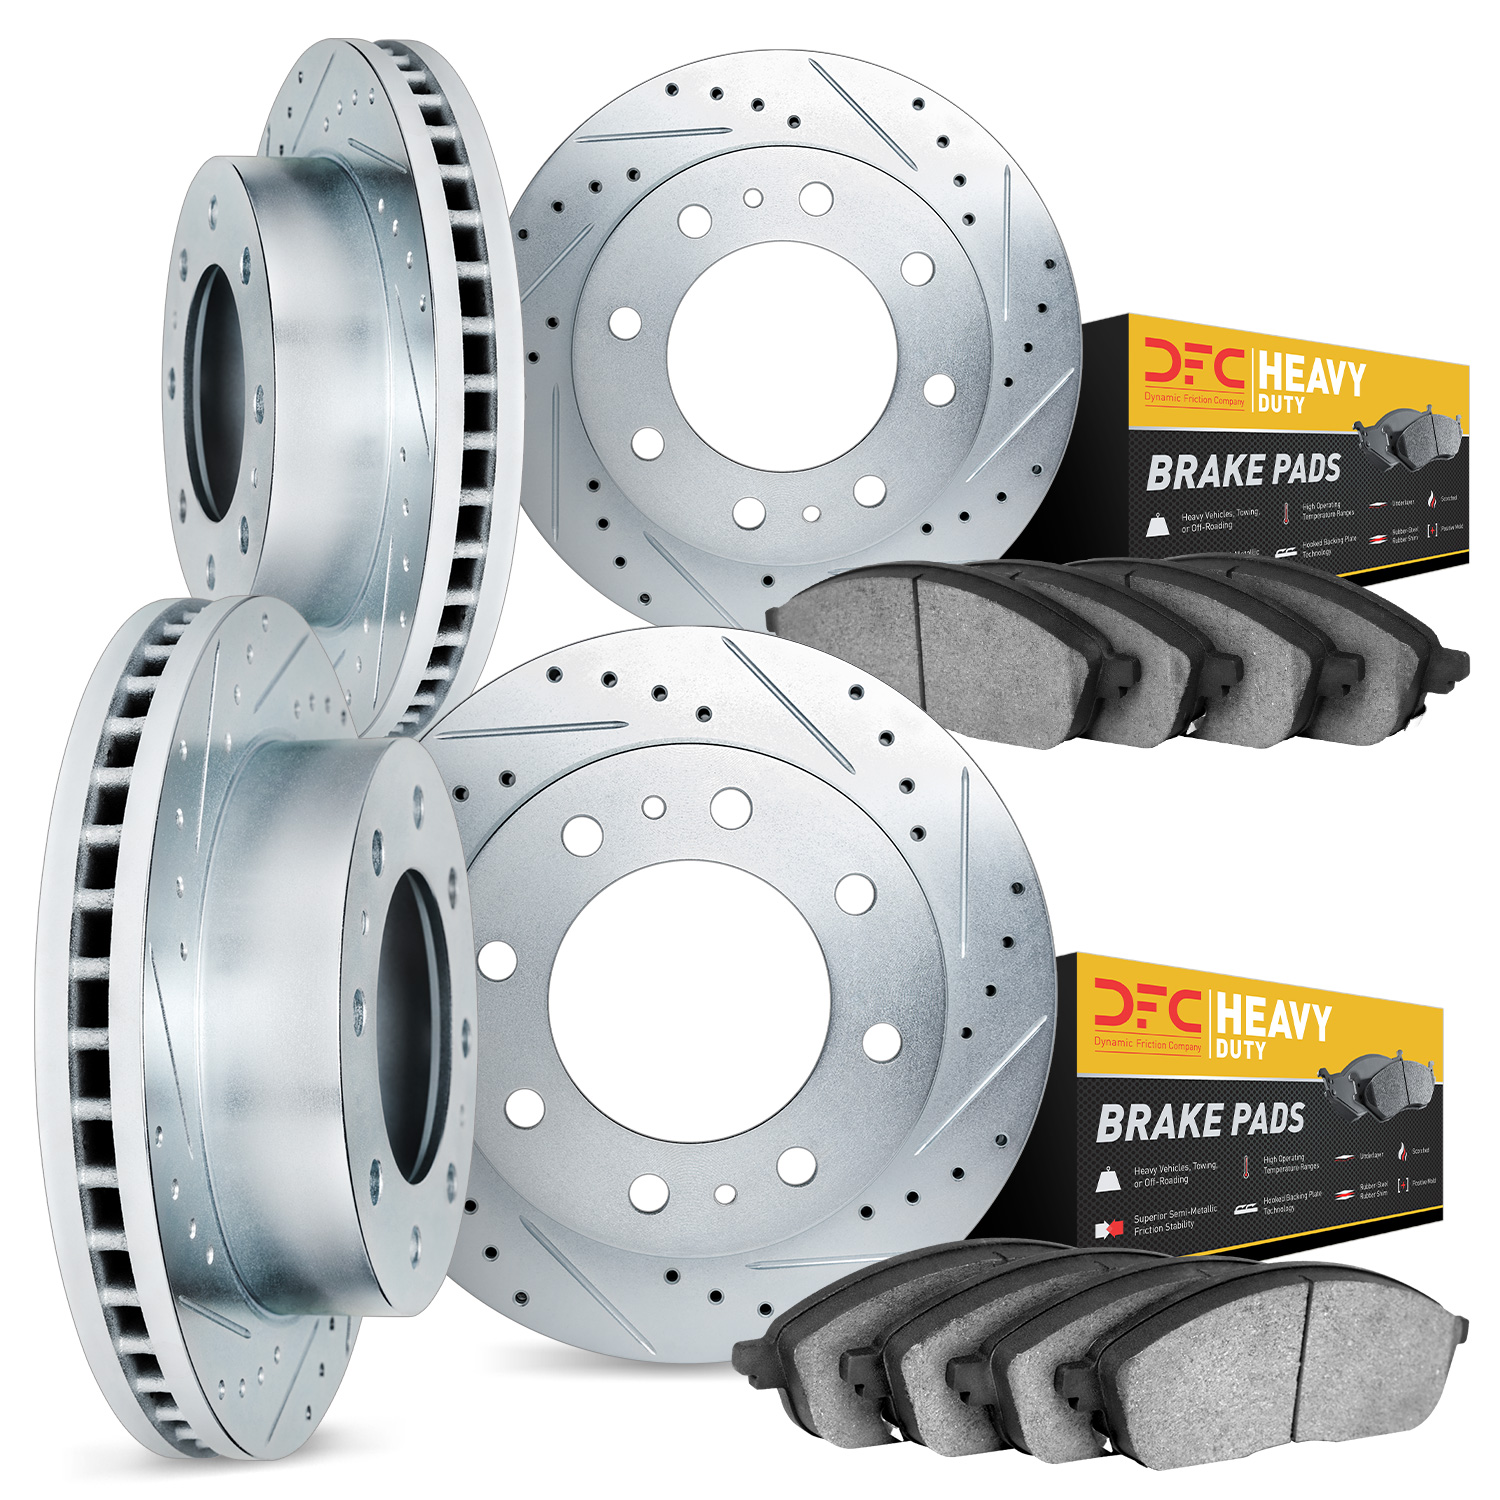 7204-99104 Drilled/Slotted Rotors w/Heavy-Duty Brake Pads Kit [Silver], Fits Select Ford/Lincoln/Mercury/Mazda, Position: Front